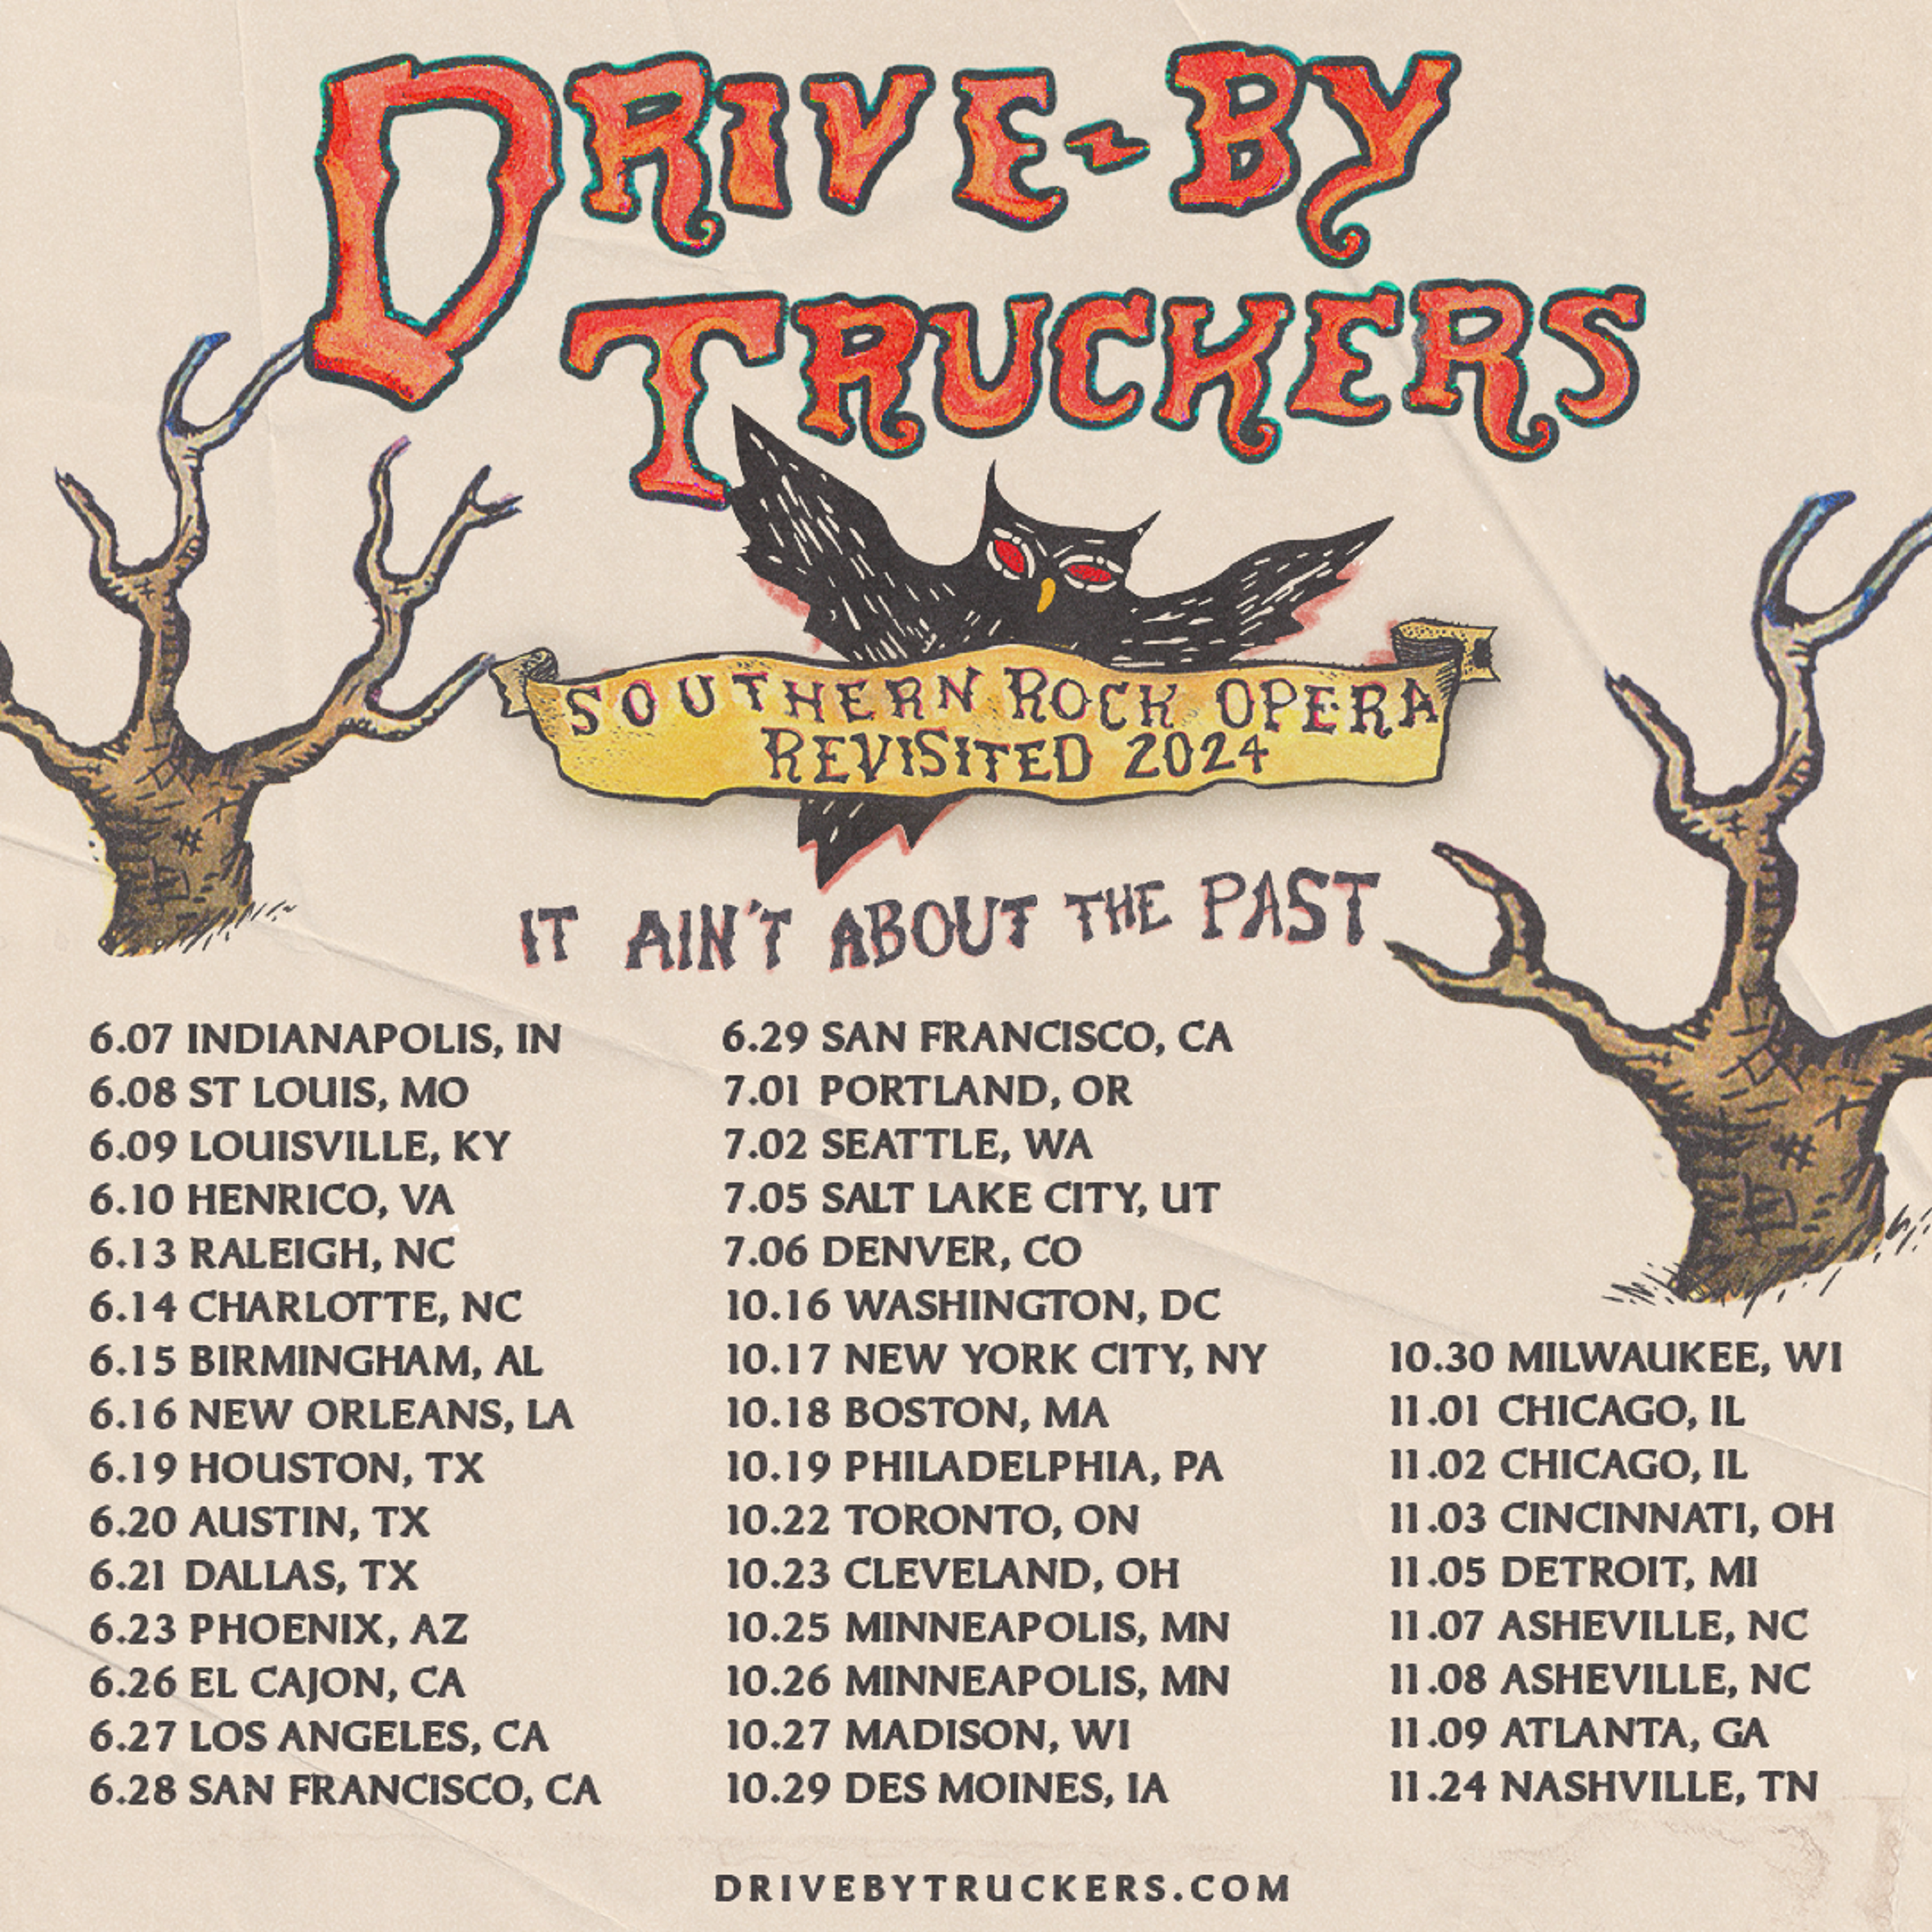 Drive-By Truckers Announce "Southern Rock Opera Revisited 2024" Tour